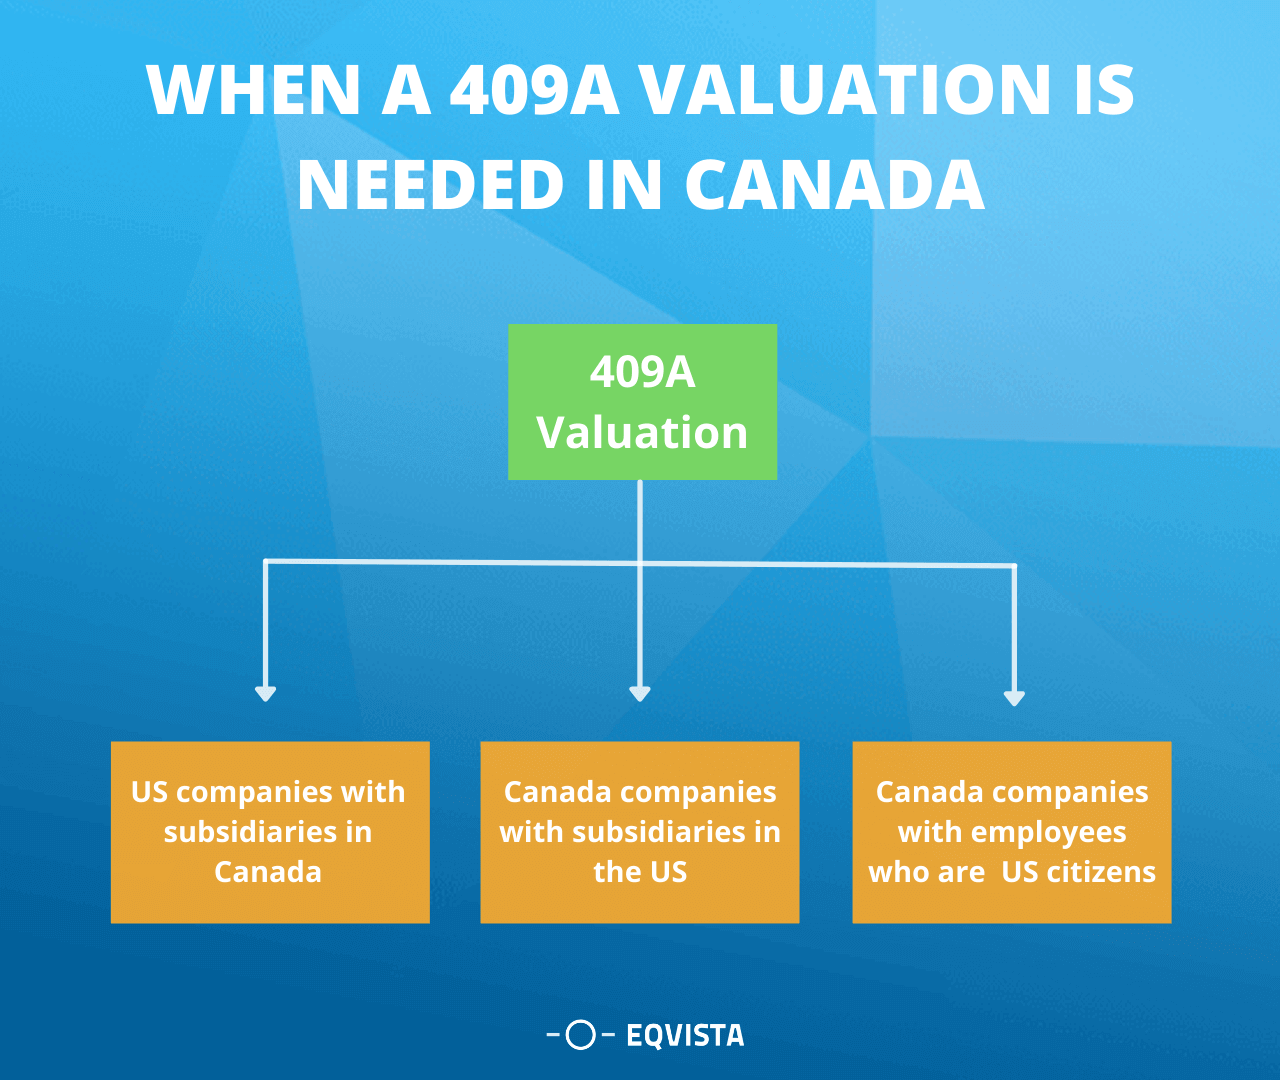 When is a 409a valuation required for a Canadian company?